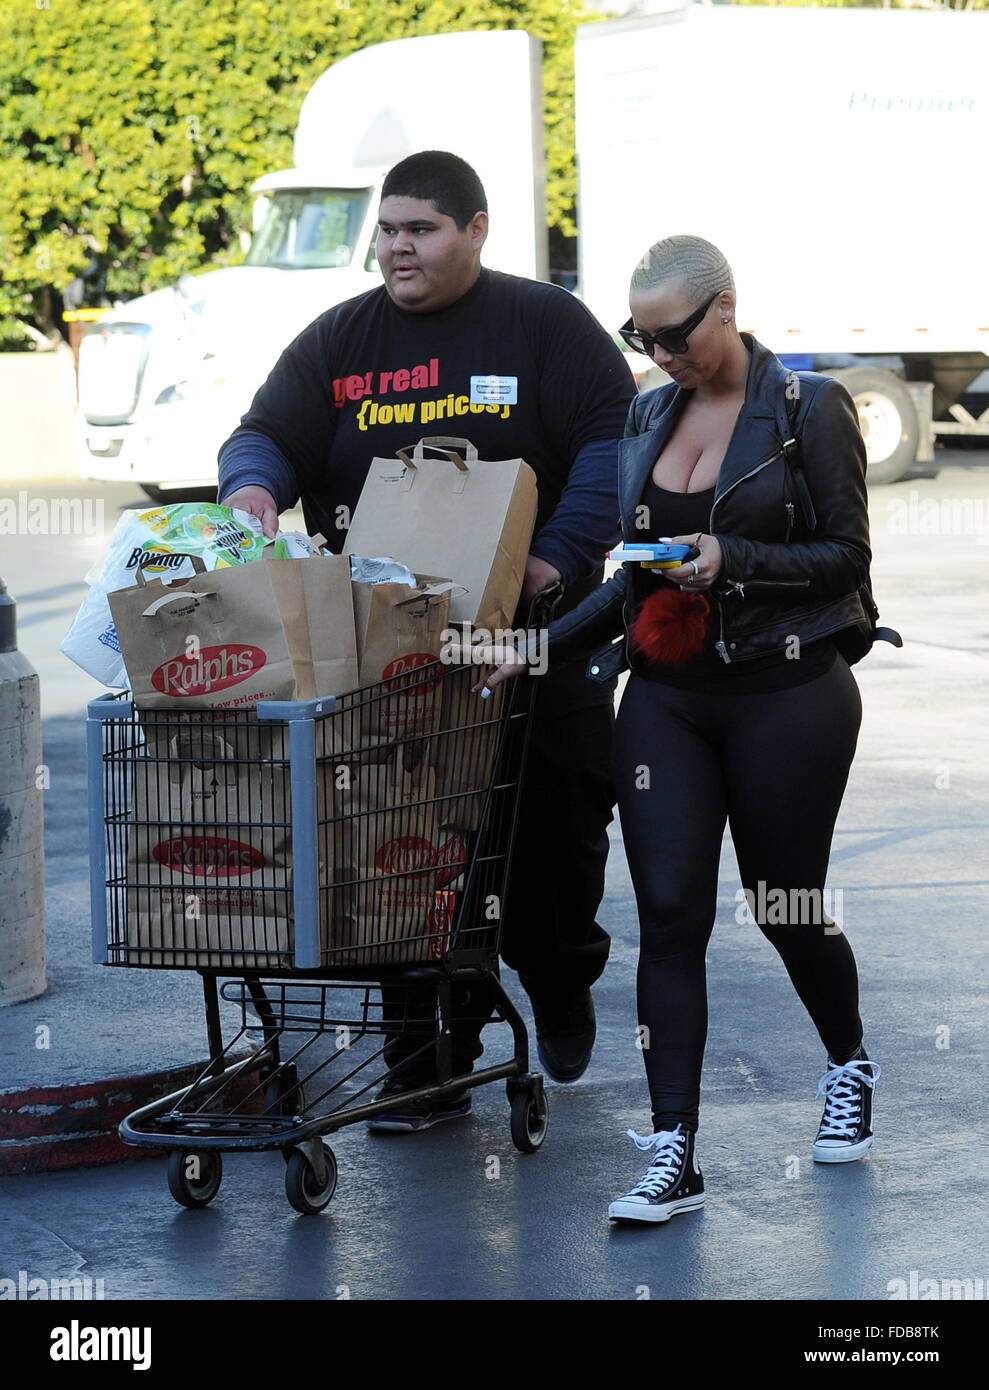 Amber Rose Spends Time With Her Mom And Got Their Nails Done At